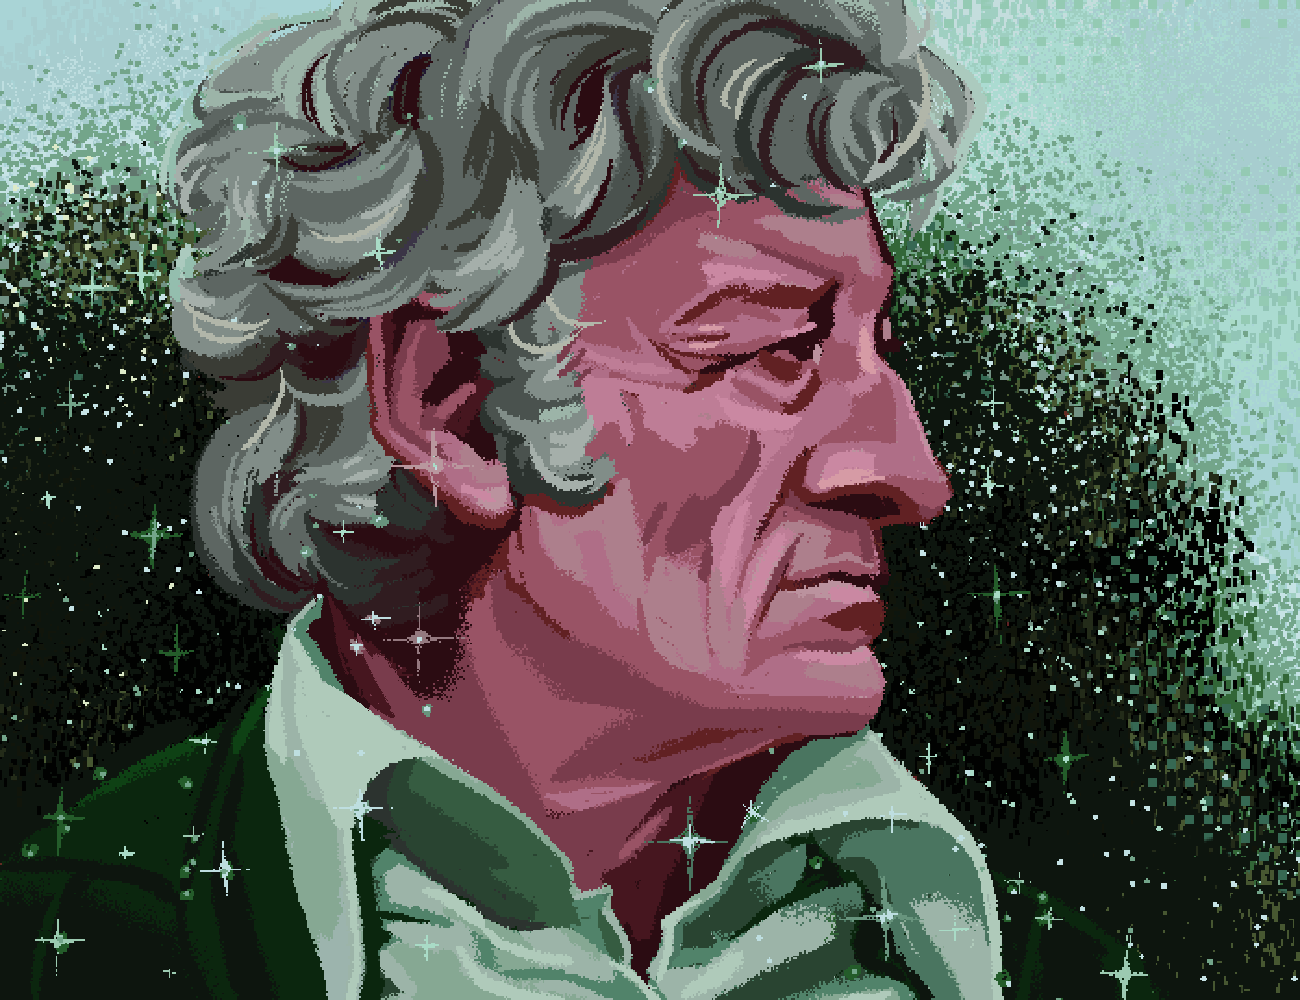 Pixel art drawing of the third Doctor in profile. He has curly gray hair and a pronounced nose, and he is an older man standing outside on a green background